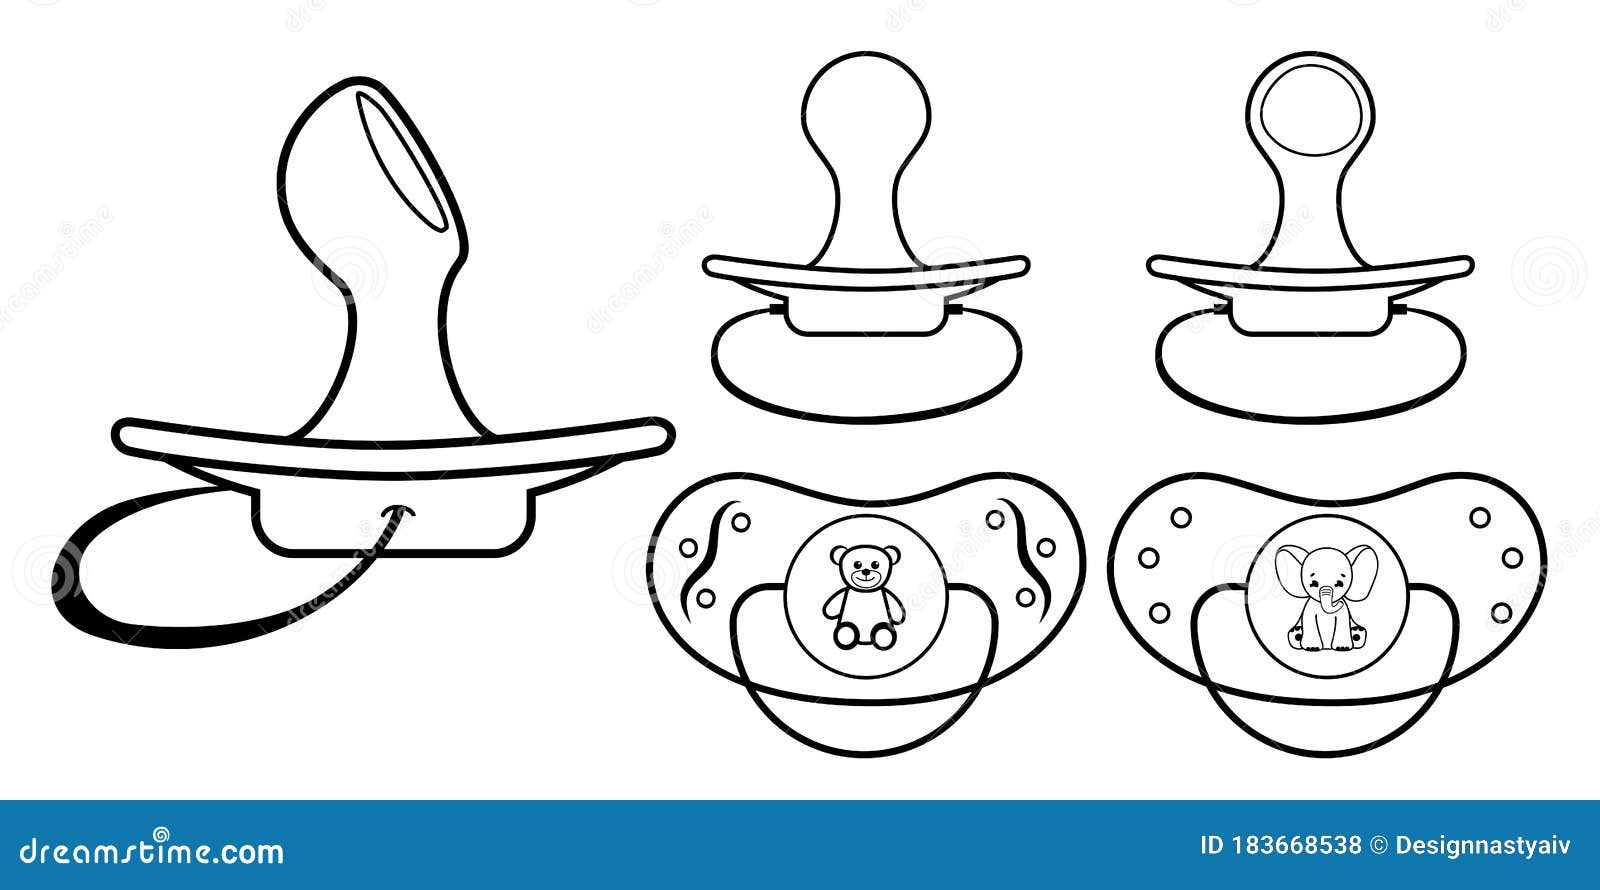 A set of pacifiers contour drawing vector black and white coloring book page stock vector